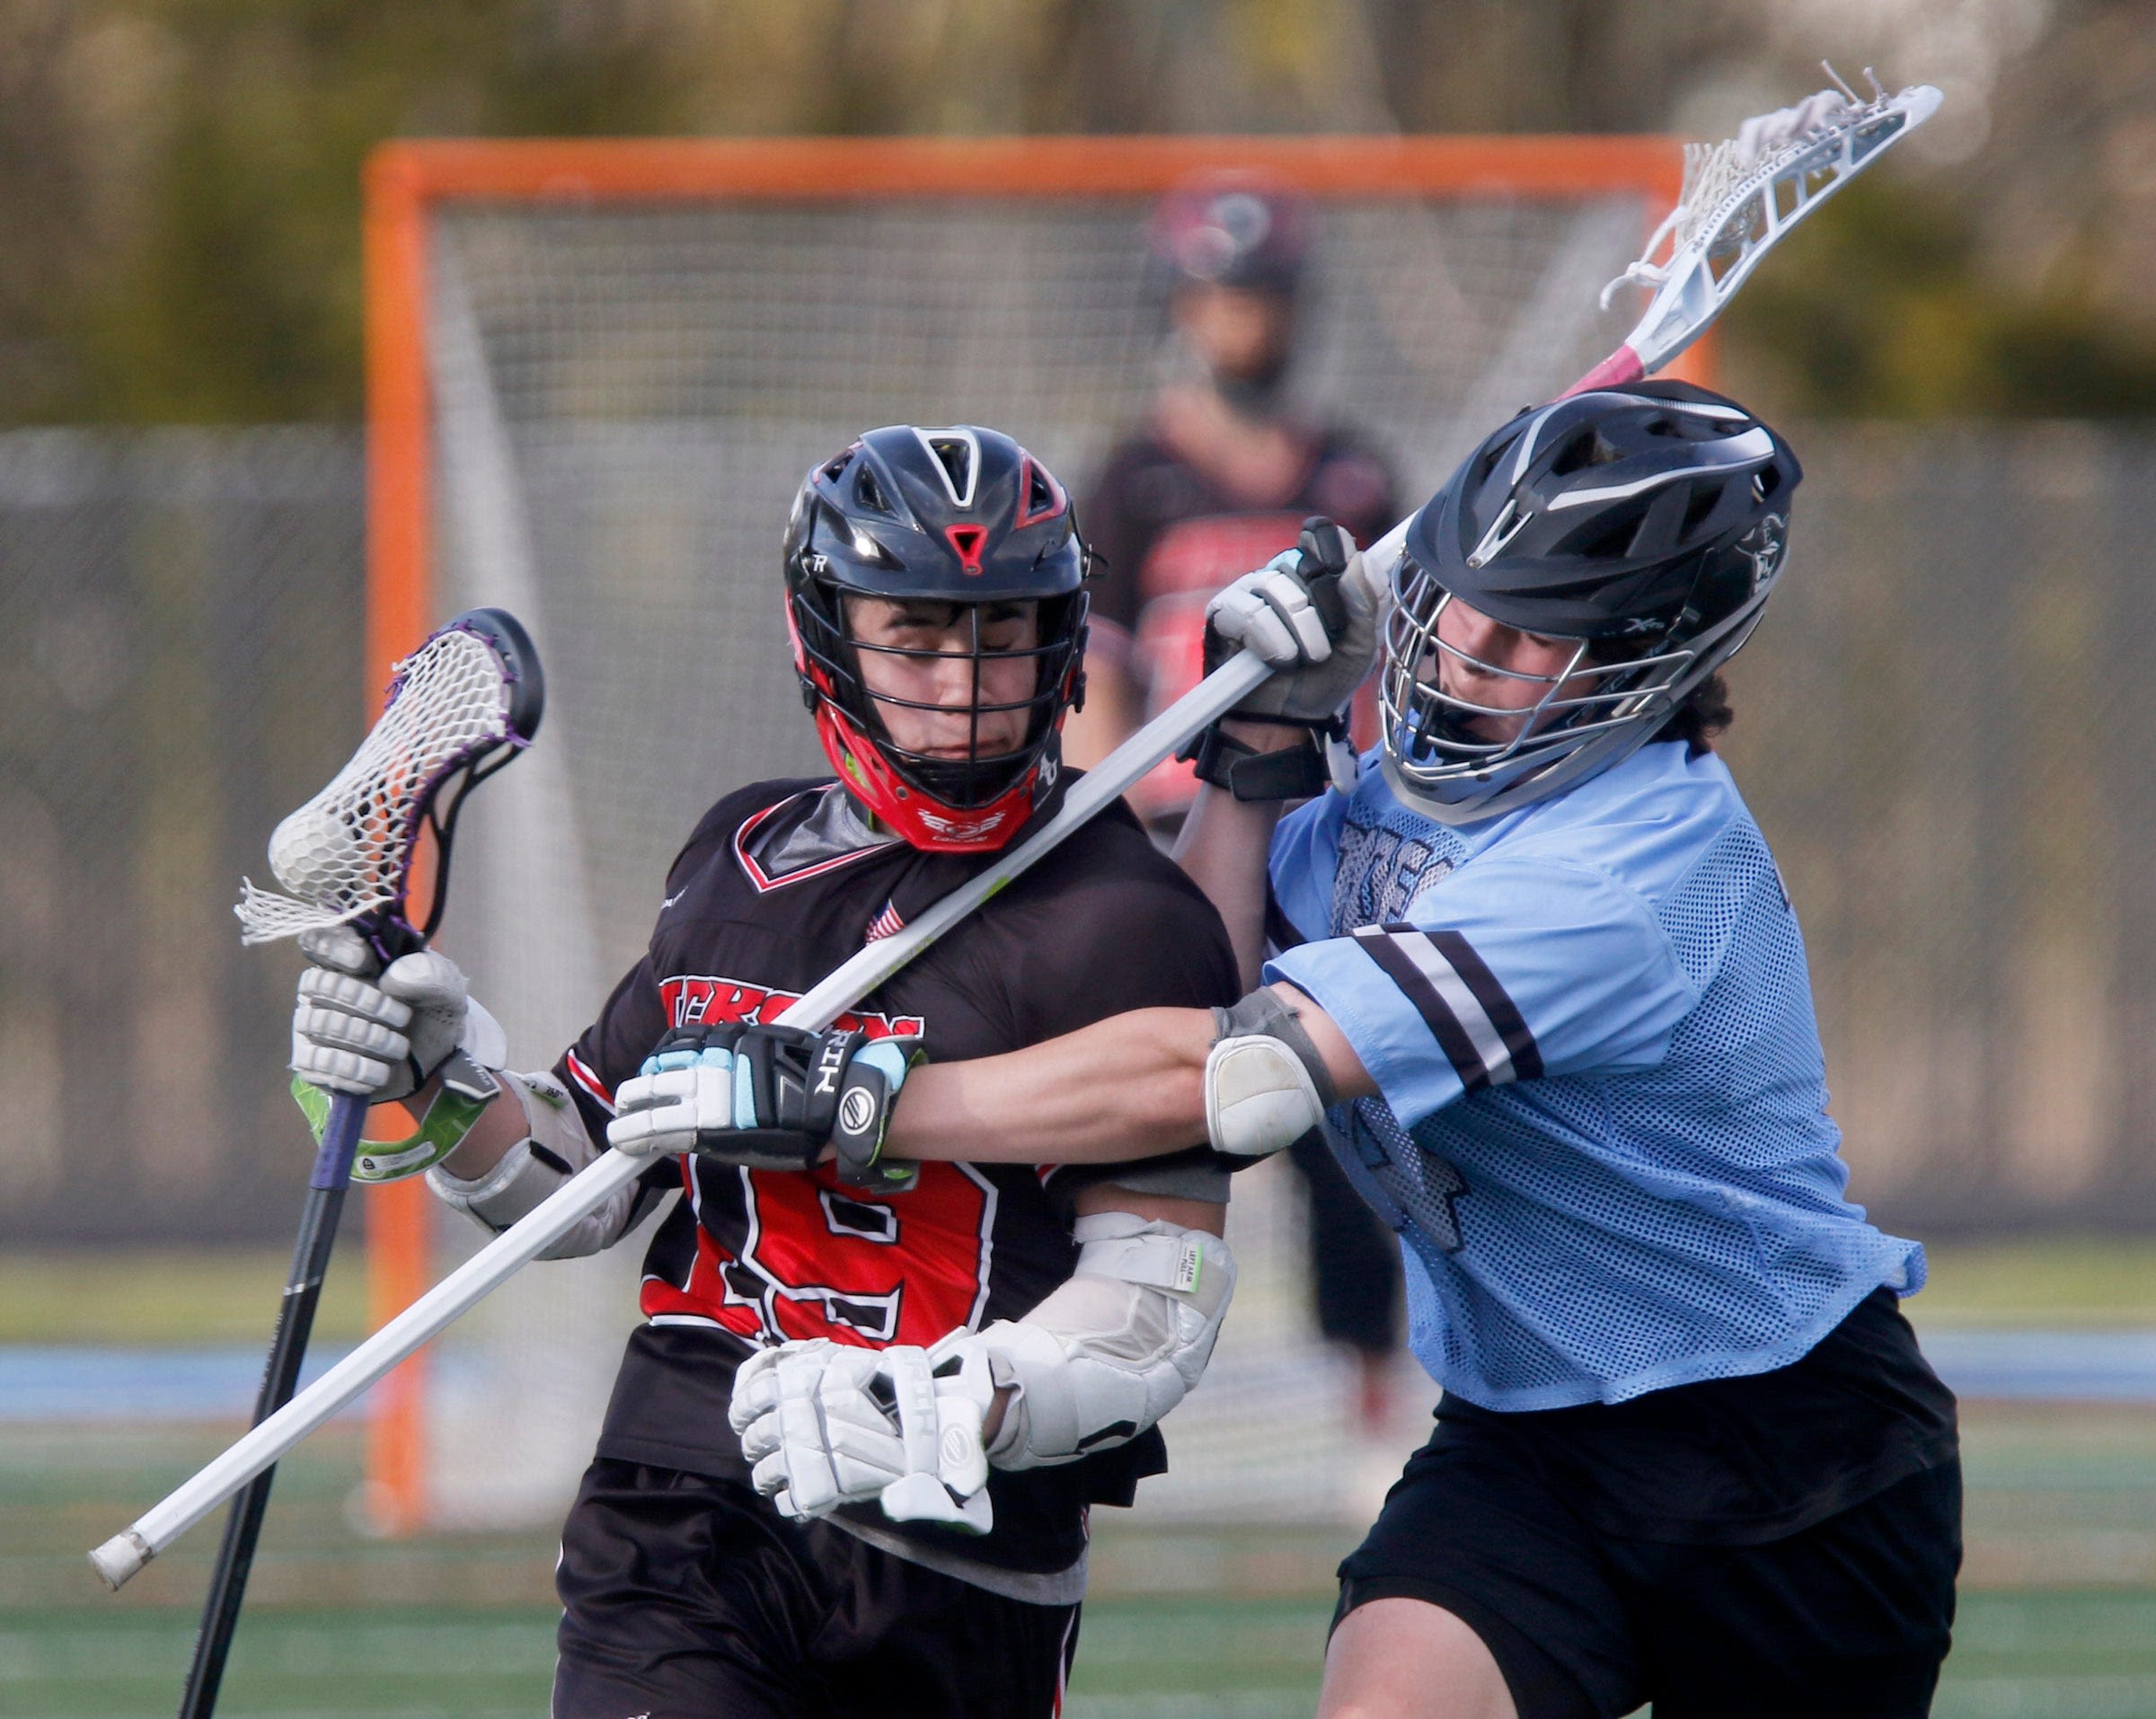 We asked Shore lacrosse coaches to pick out their unsung heroes. Here's what they said